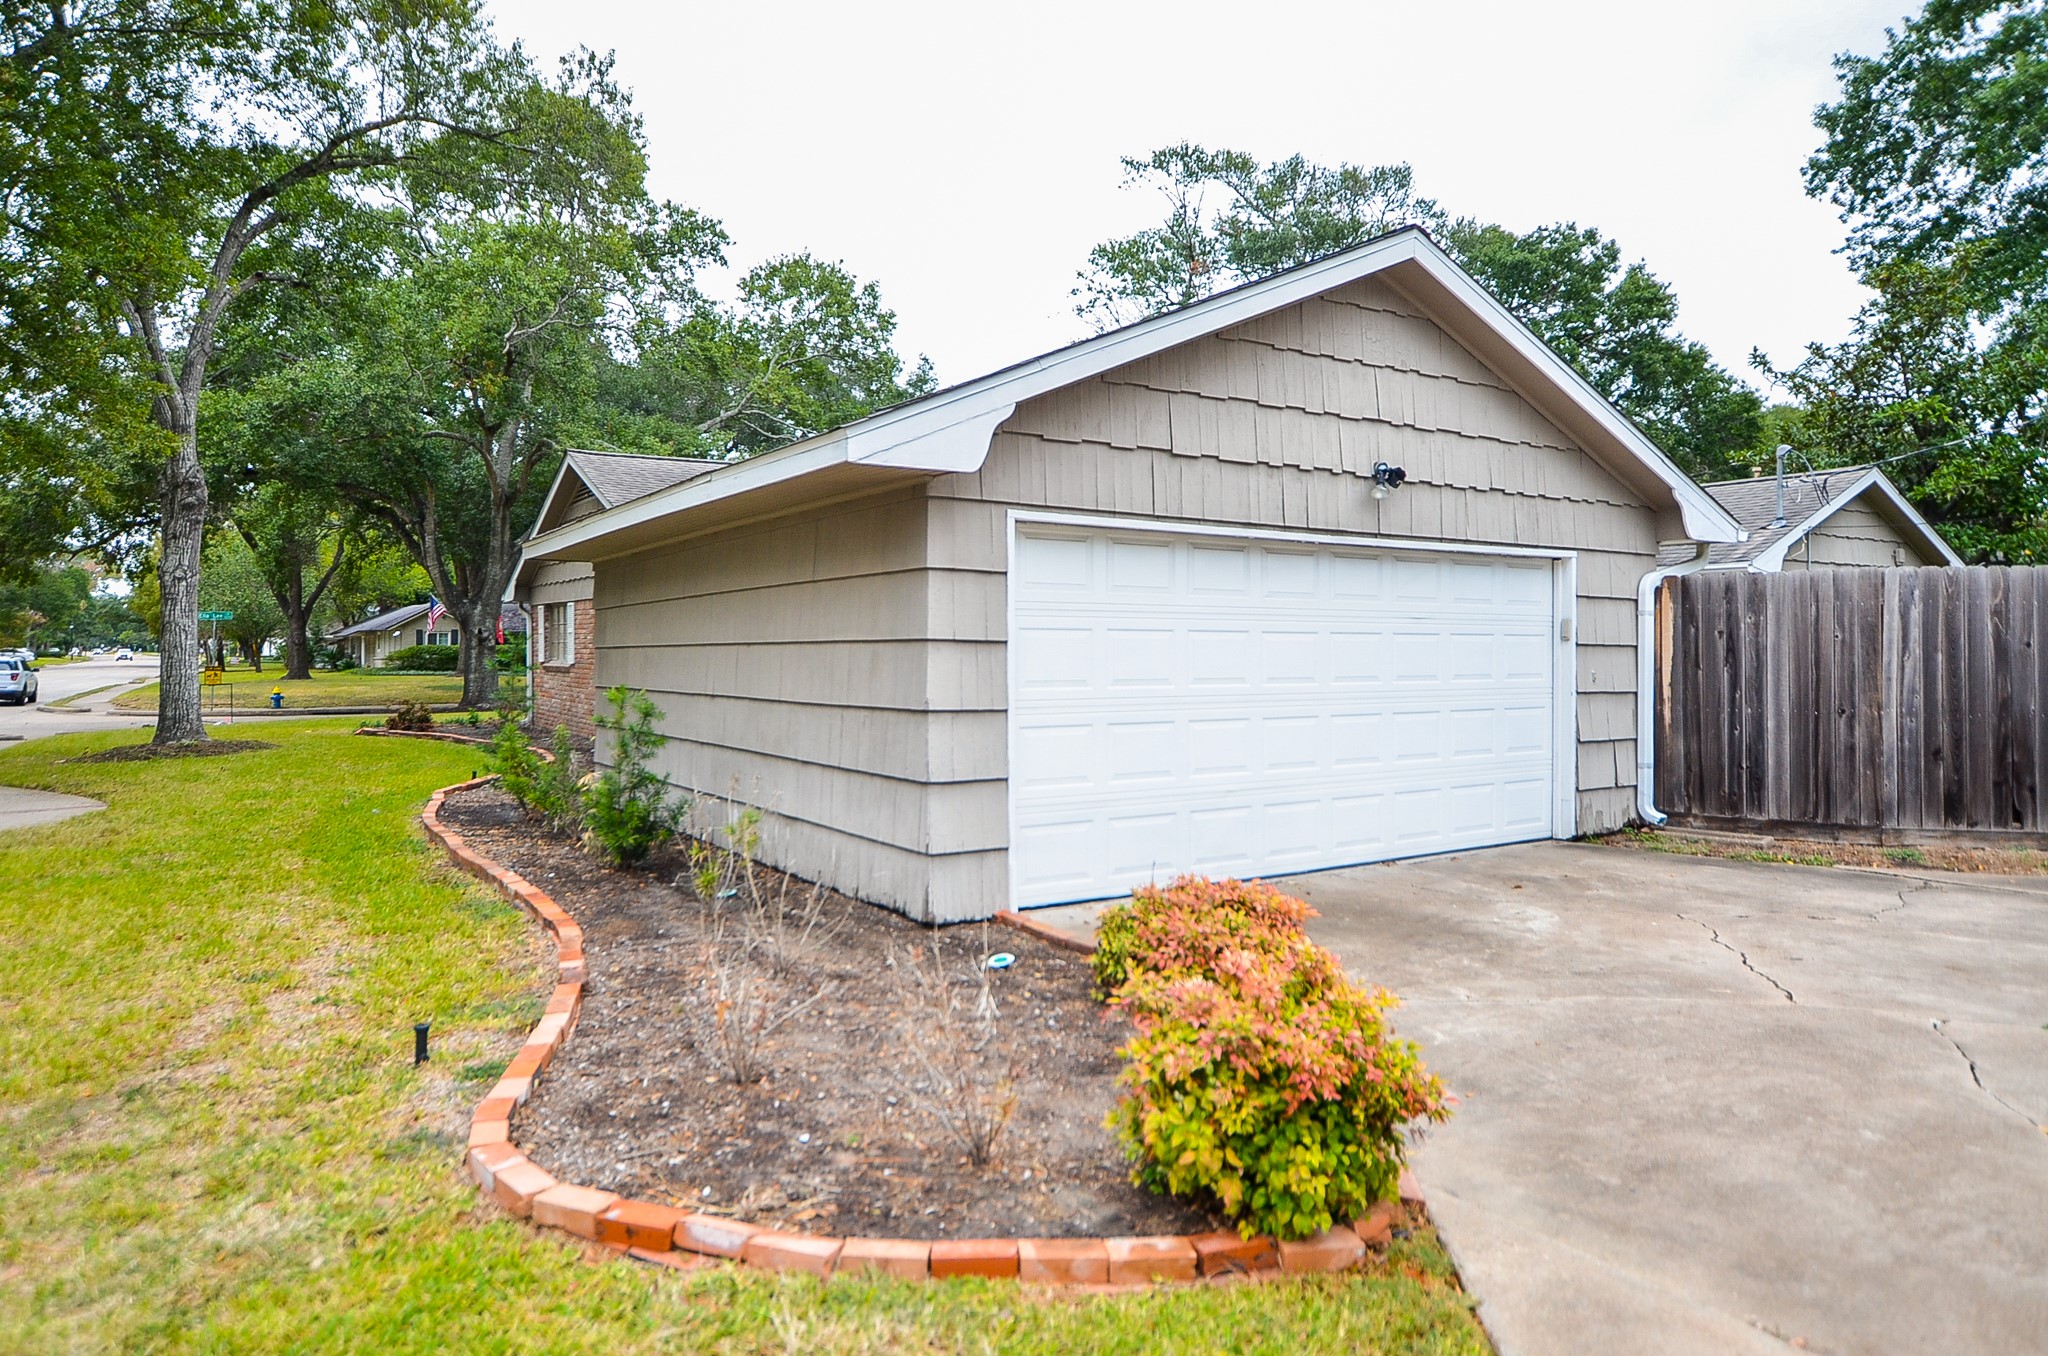 The dual-car attached garage is pristine looking above a roomy driveway.